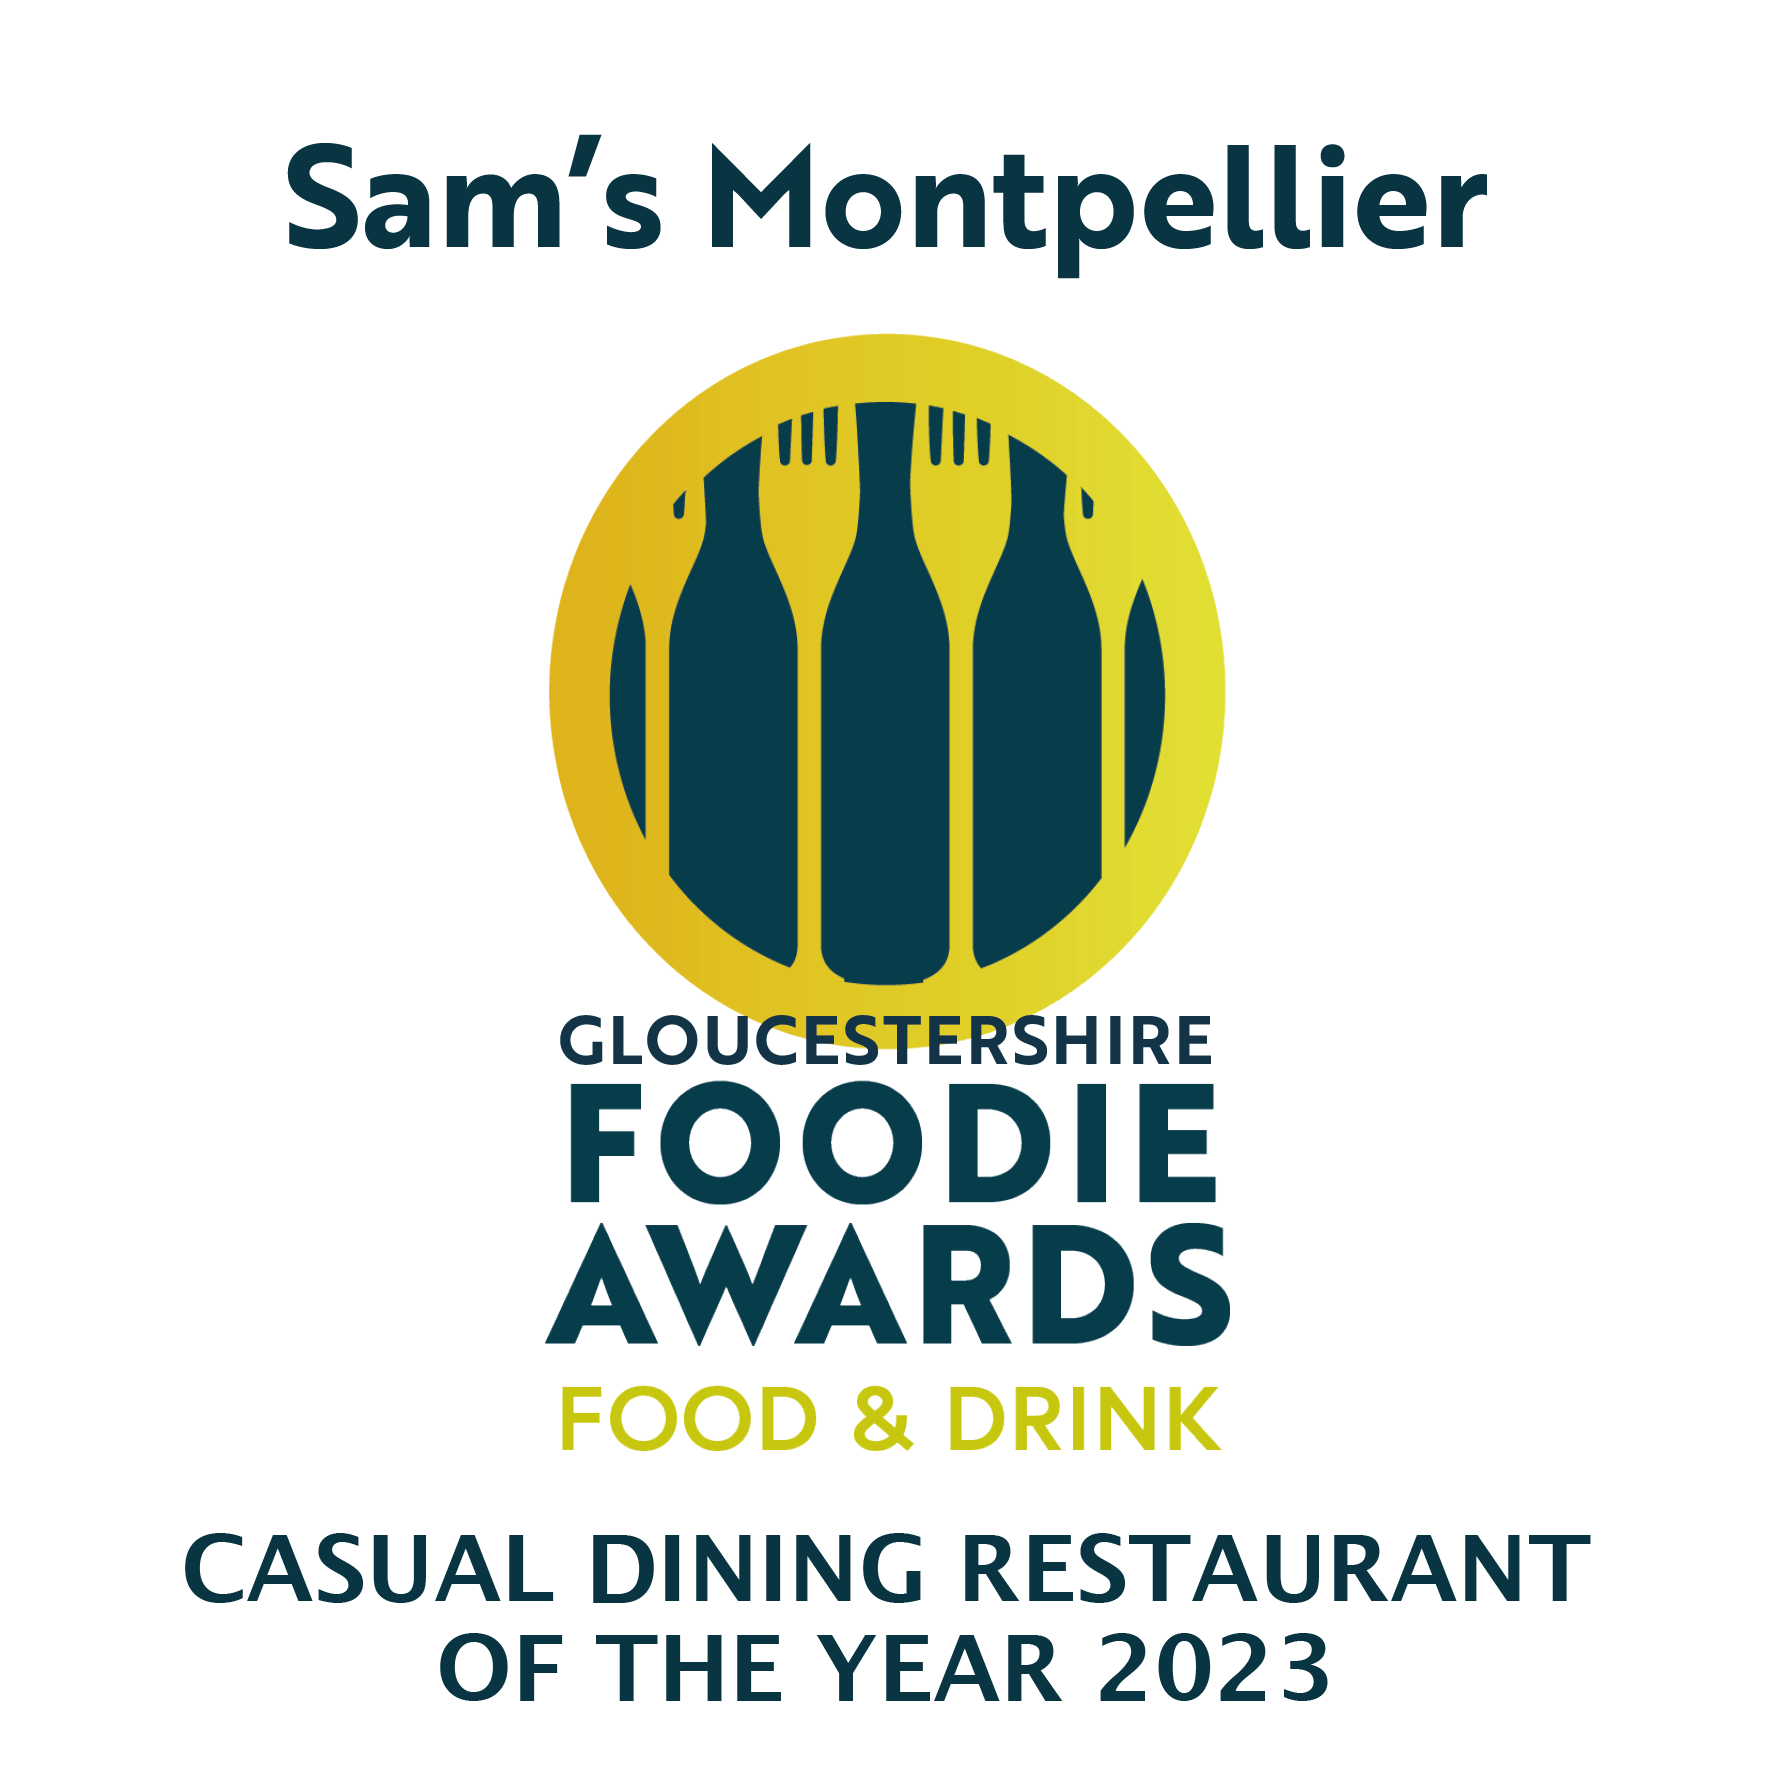 Gloucestershire Foodie Awards - Casual Dining Restaurant of the Year 2023